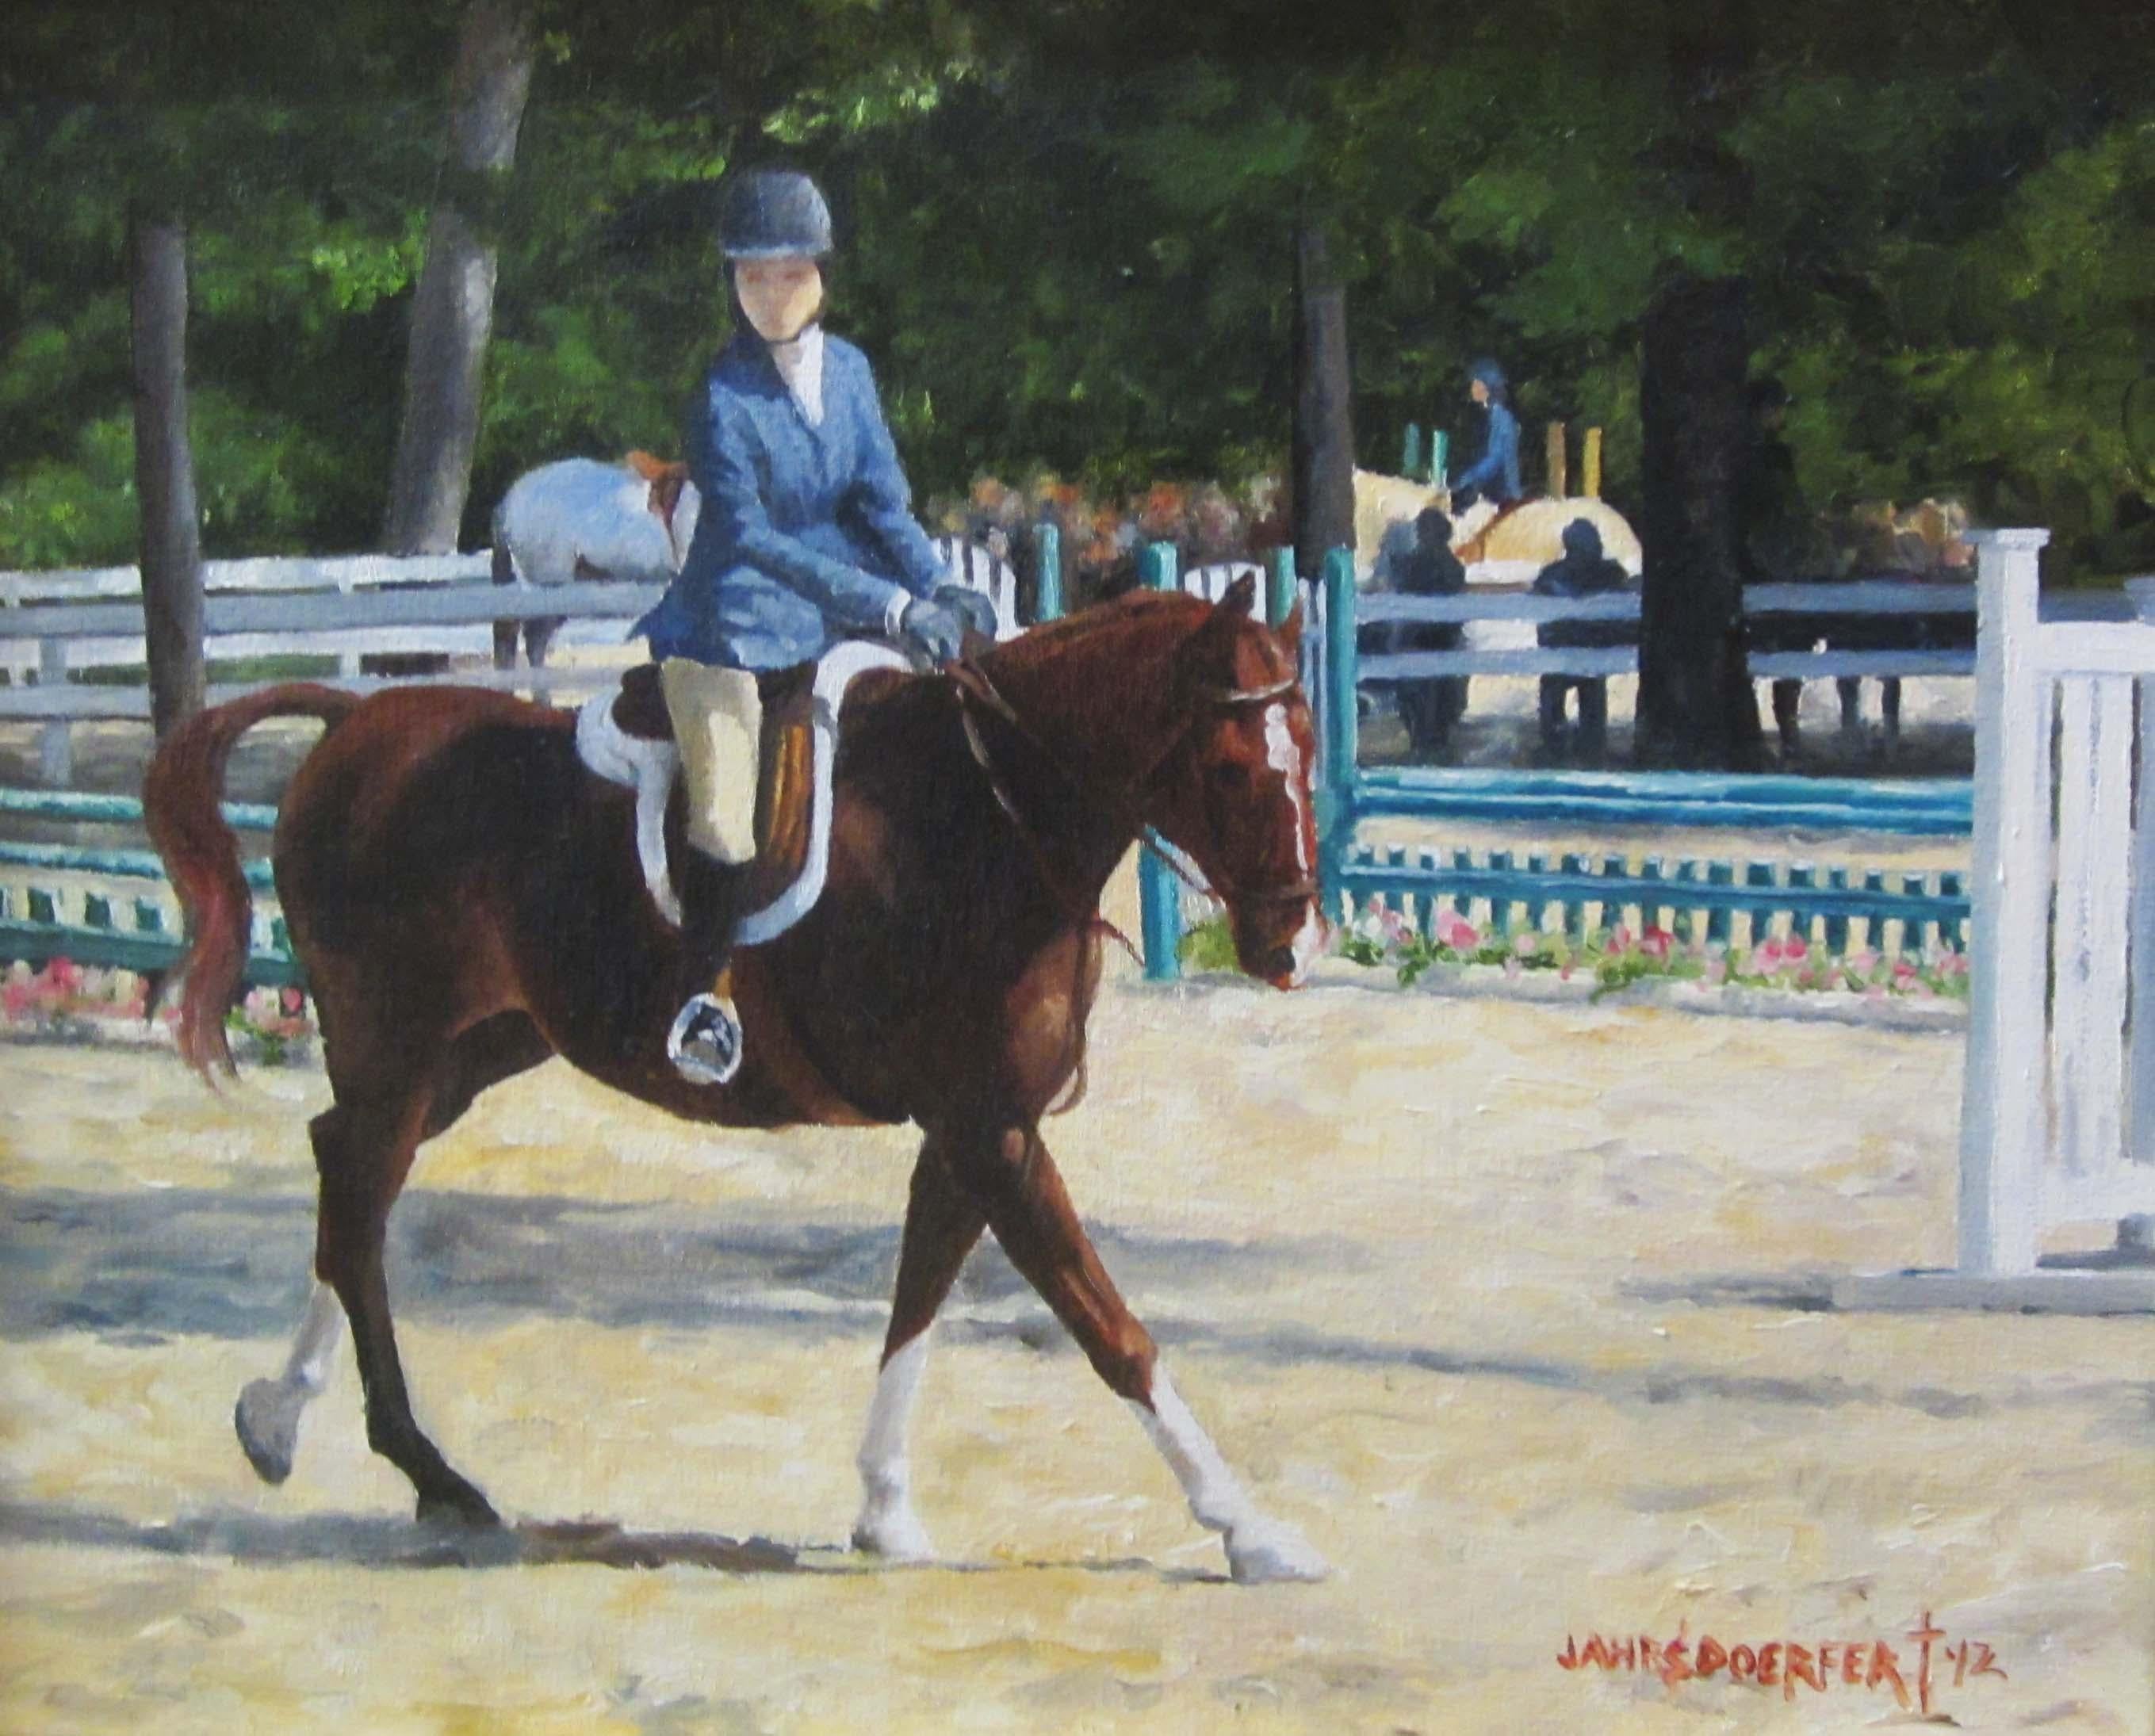 "Concentration", is an 8x10 equine landscape oil painting on canvas by artist James Jahrsdoerfer featuring a dark brown horse and rider dressed in blue dressage clothing. They are trotting around the arena, looking ahead to the next jumping element.